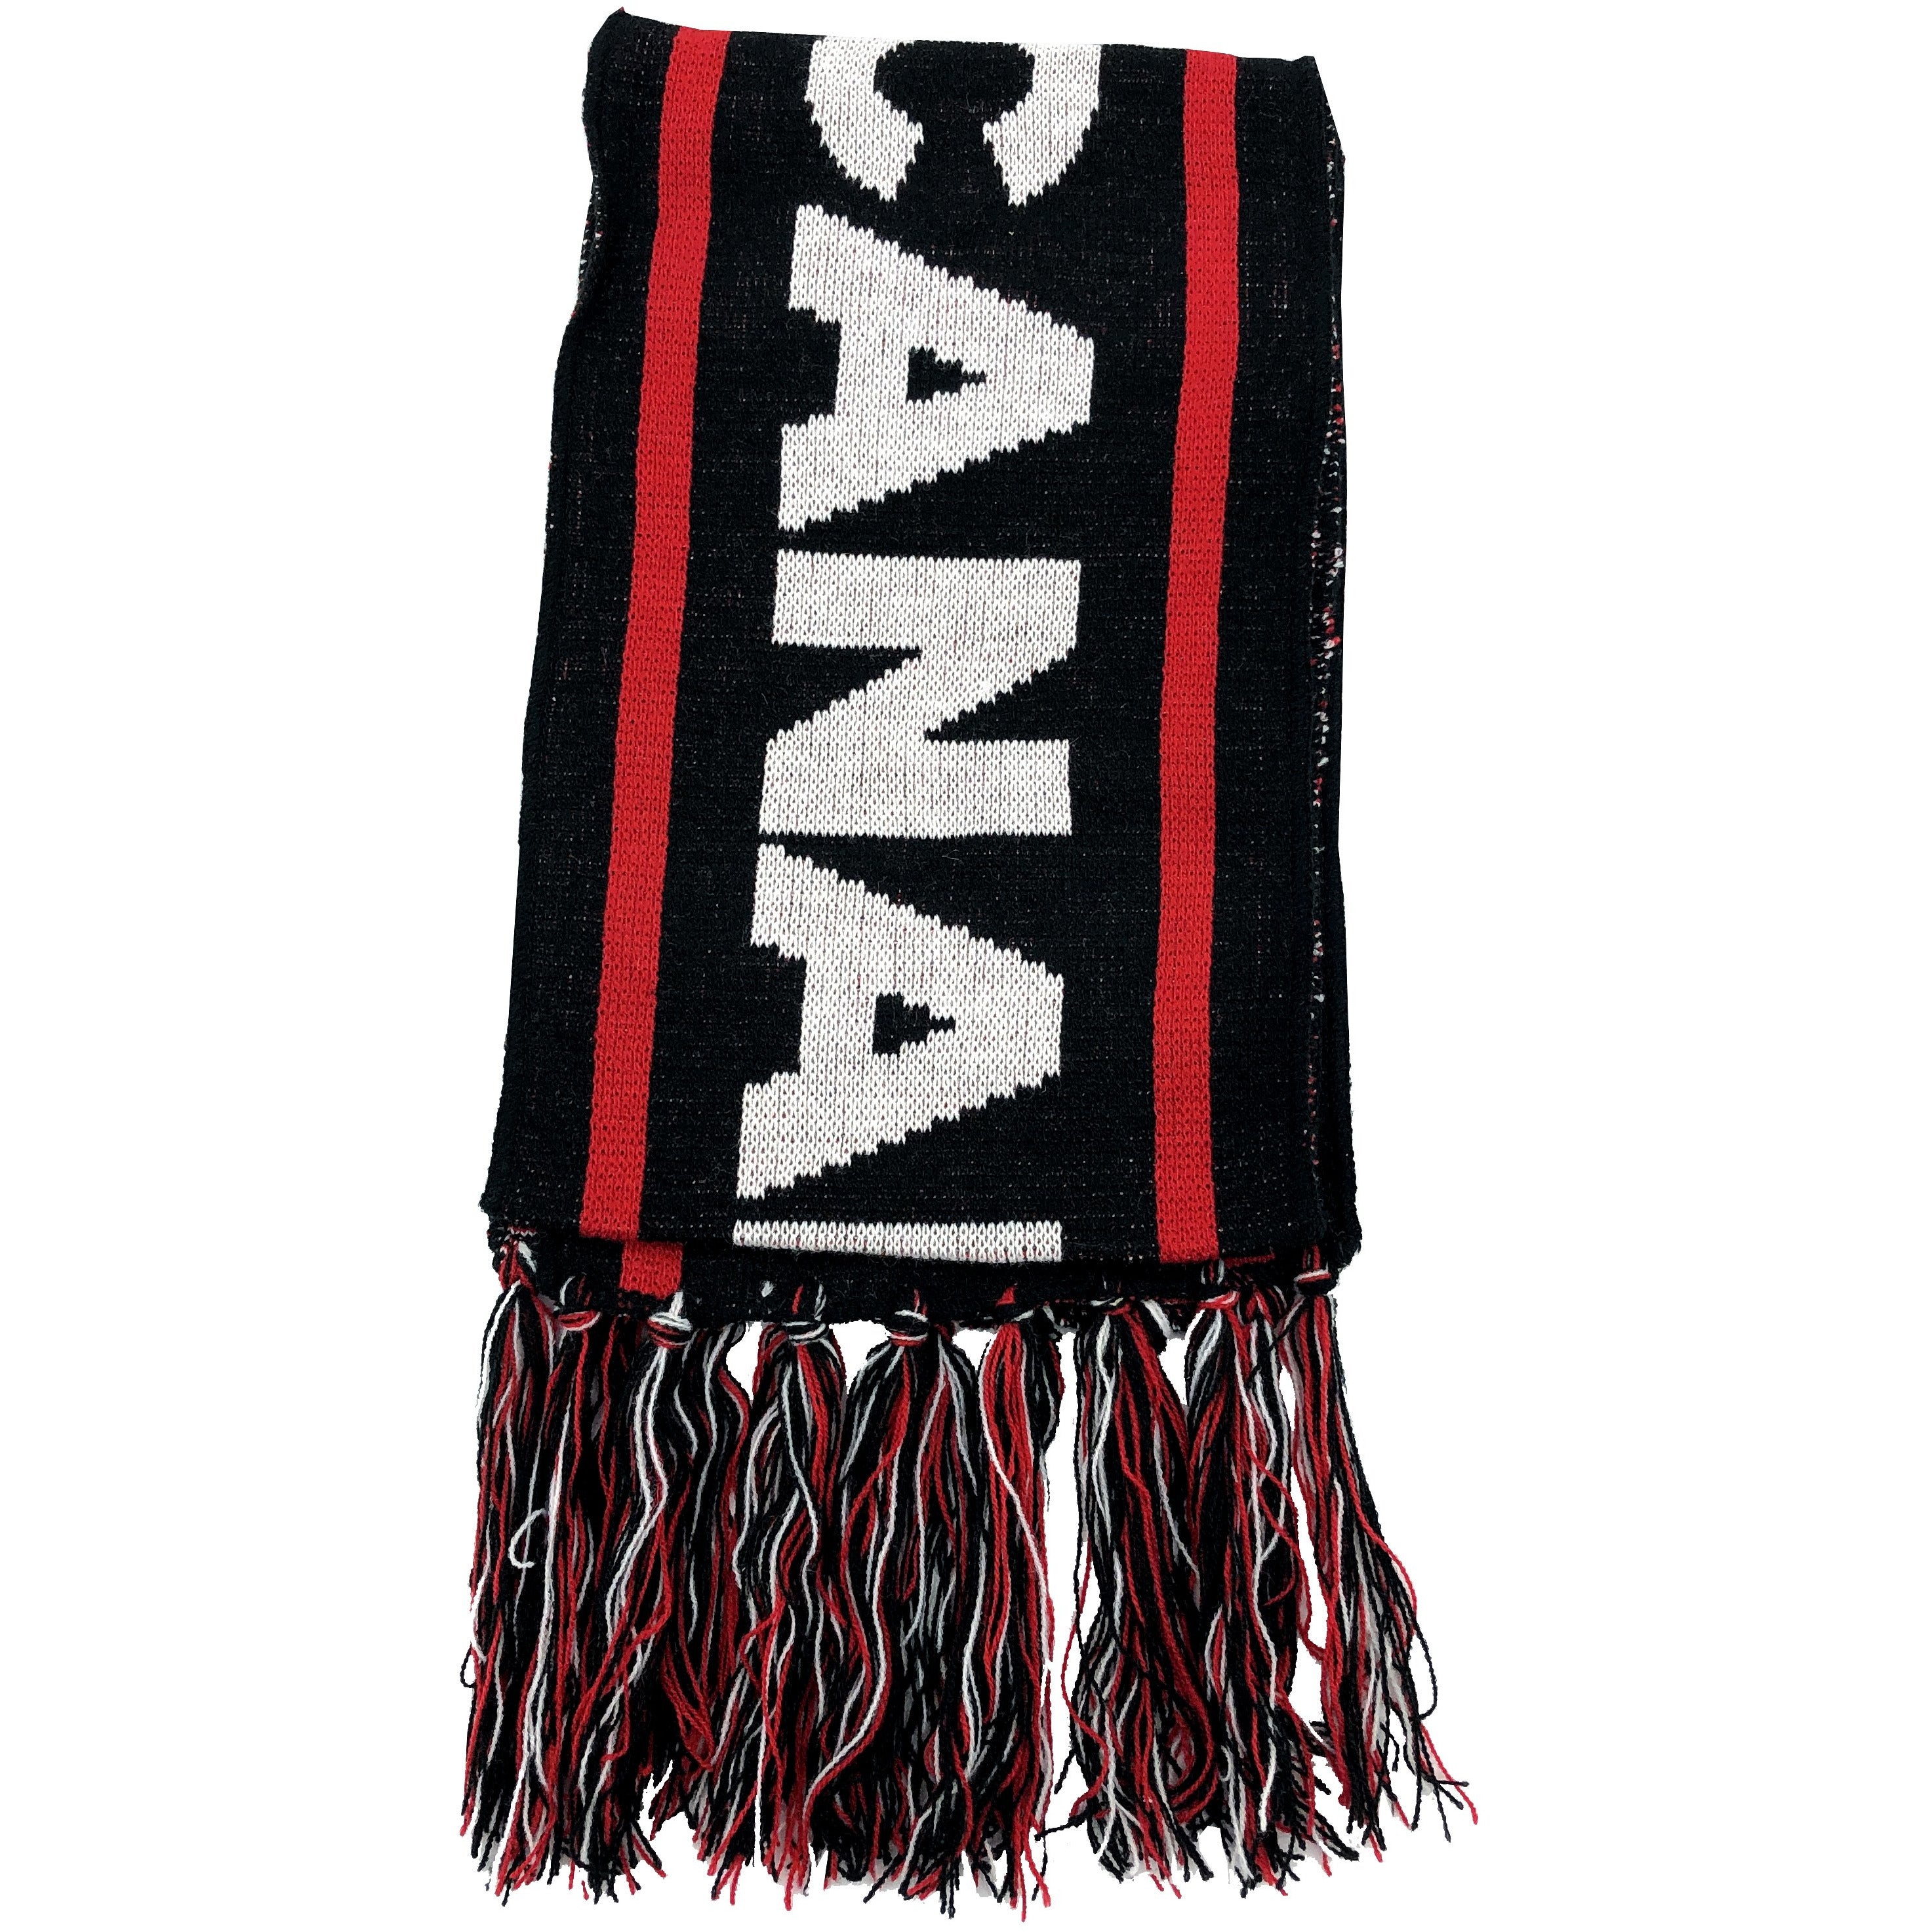 Montreal Canadian scarf